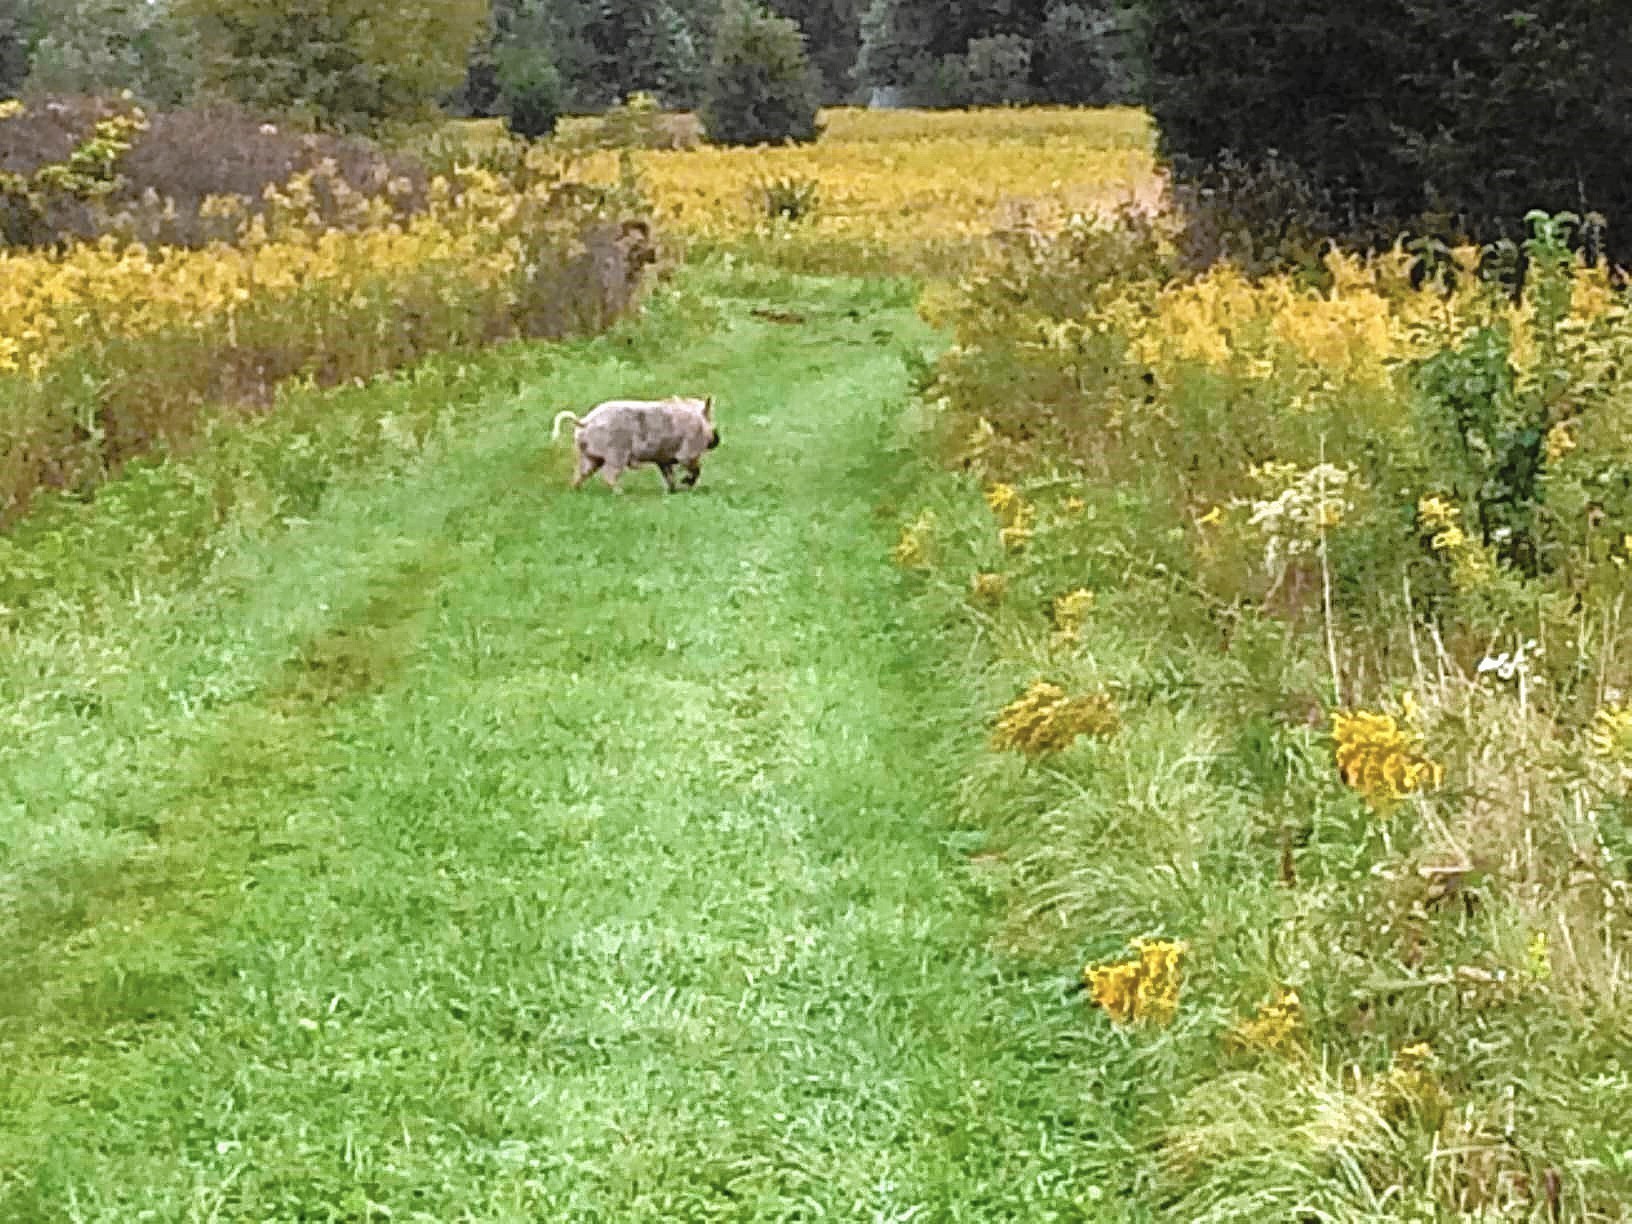 Roaming Naperville pig enjoys life on the lam as he eludes capture - Chicago Tribune